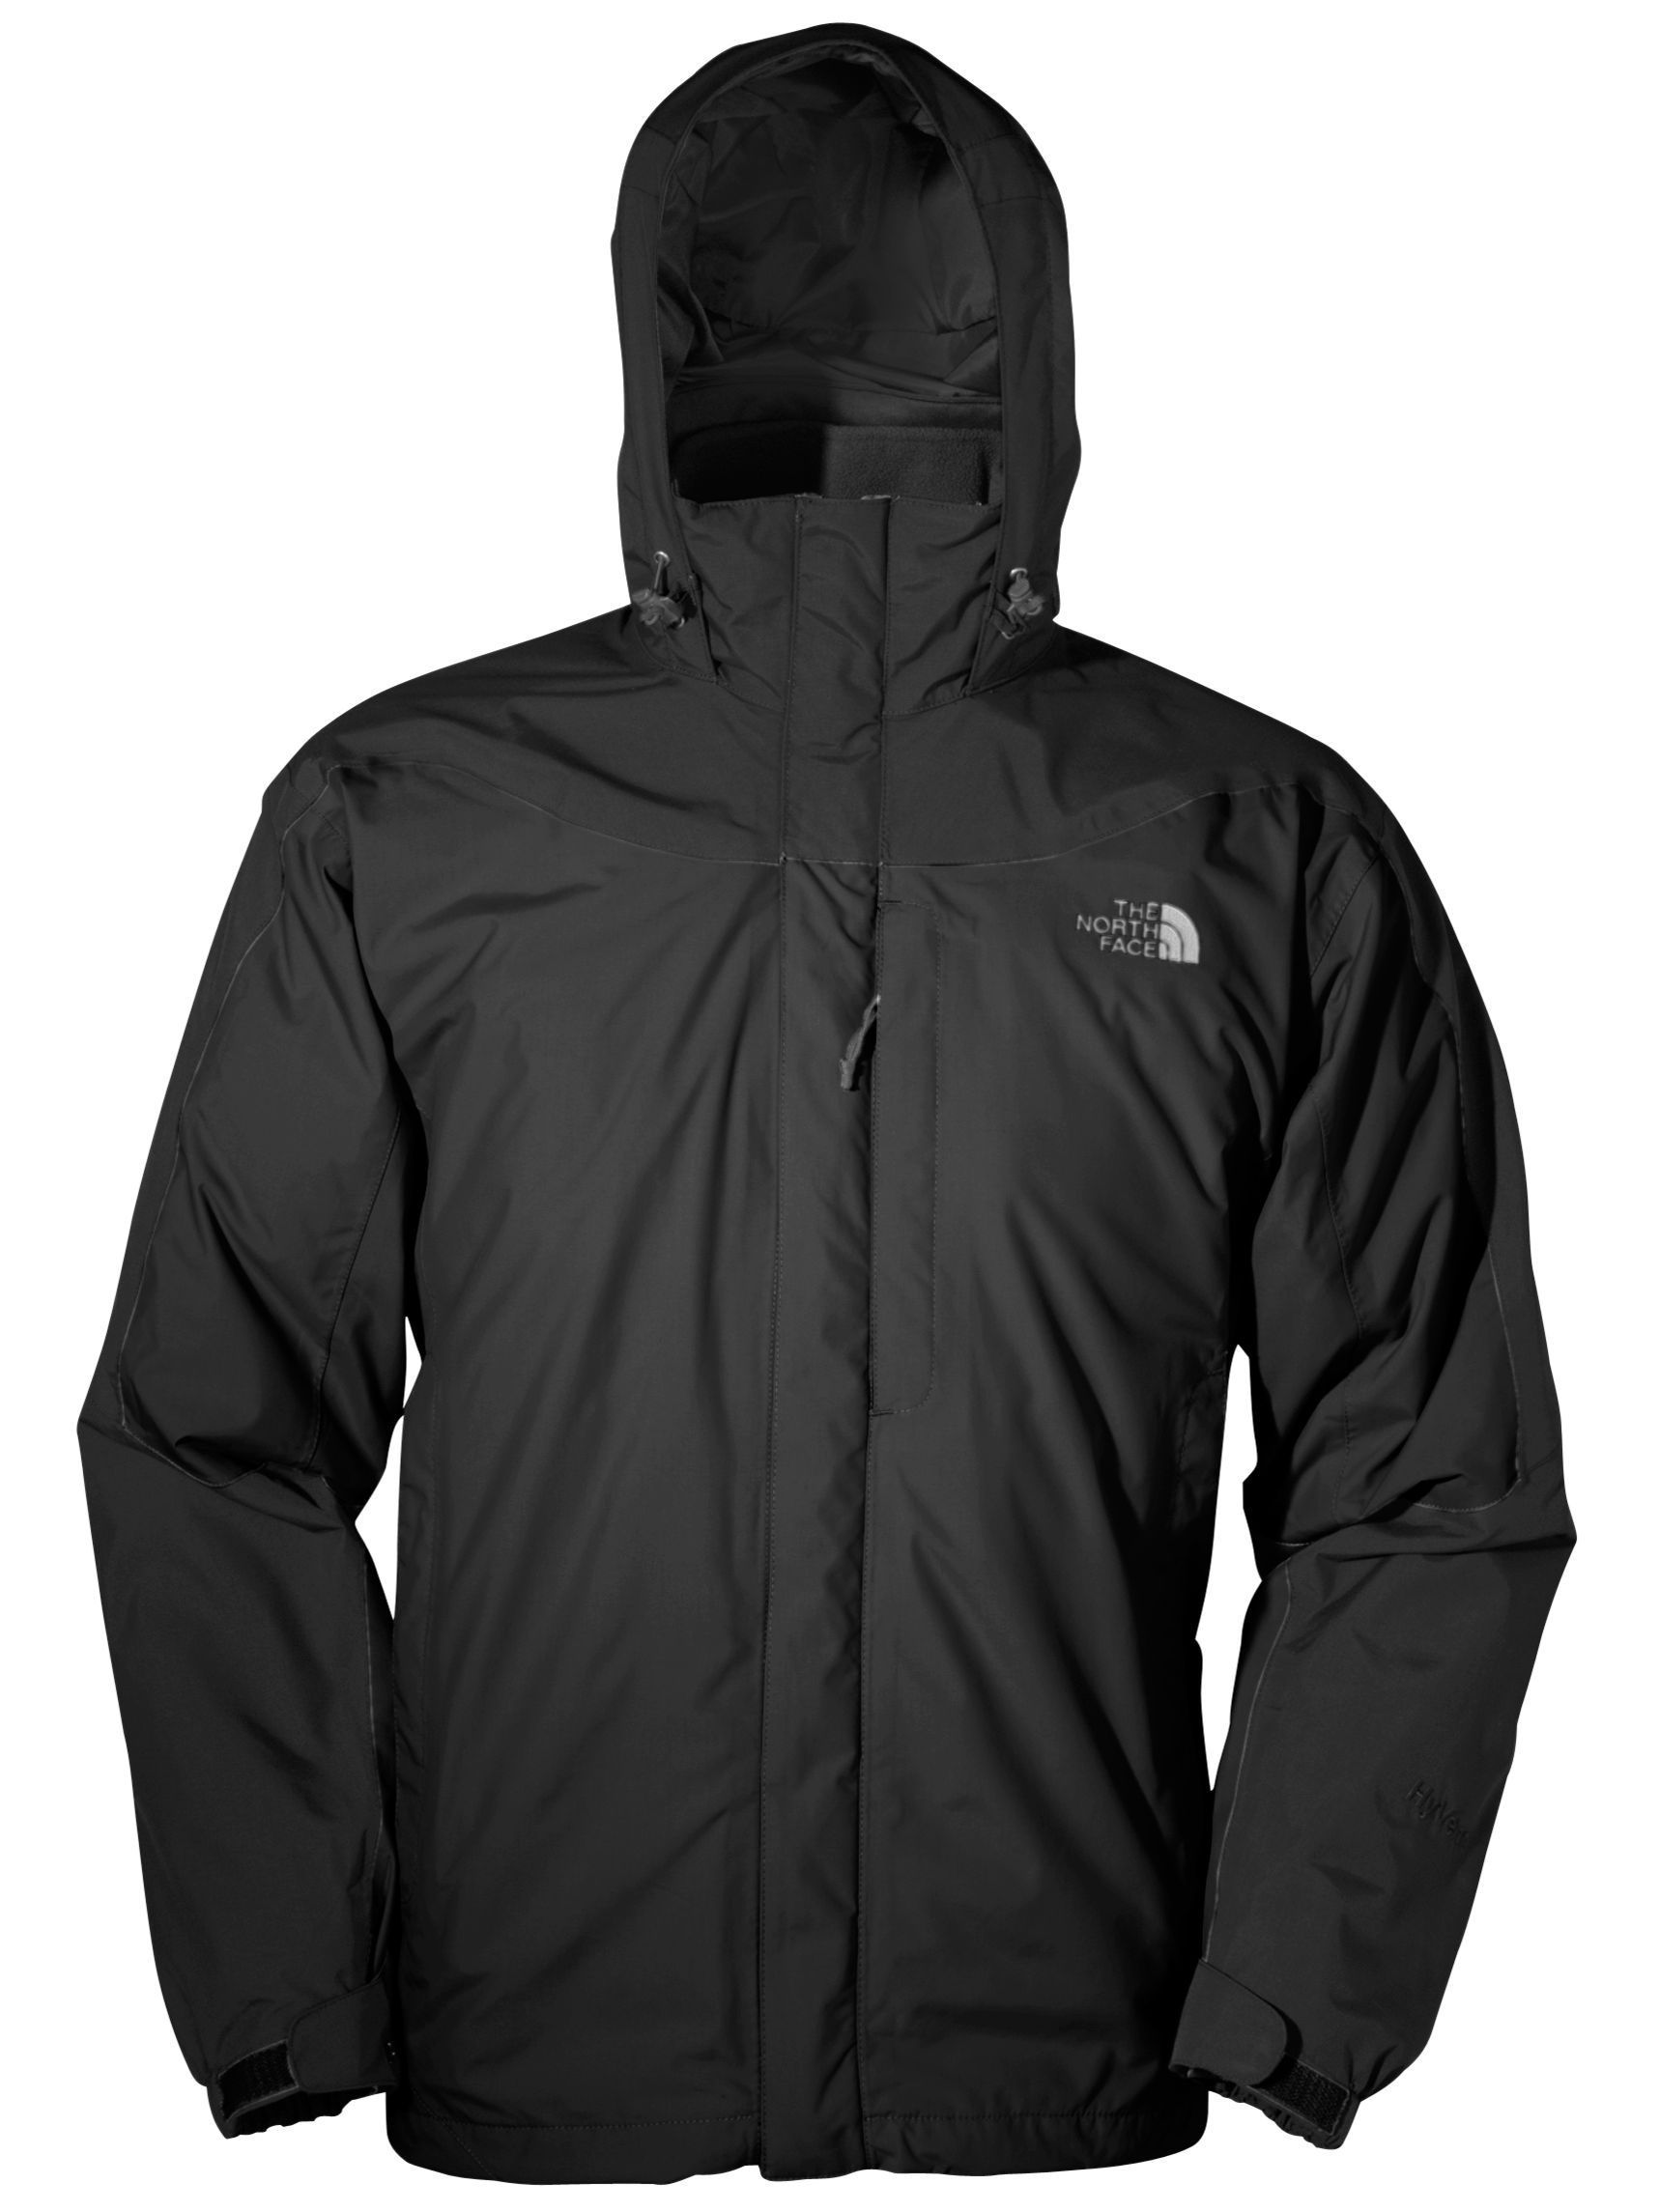 The North Face Men's Evolution Triclimate Jacket, Black at John Lewis